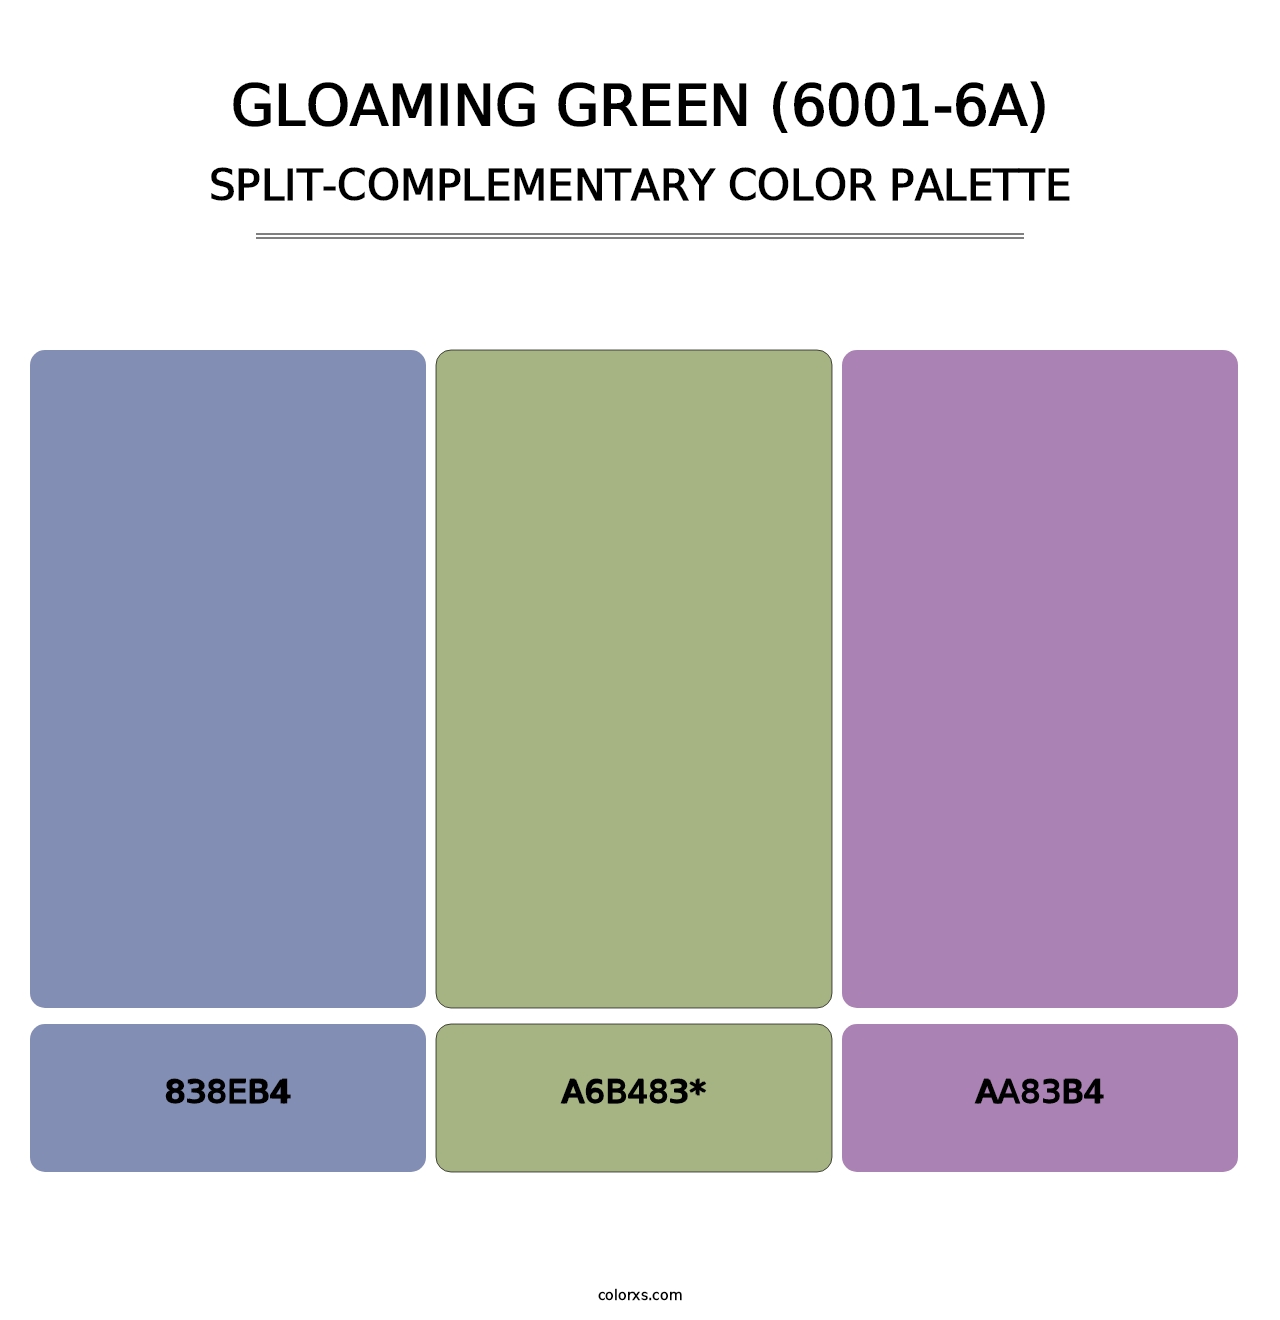 Gloaming Green (6001-6A) - Split-Complementary Color Palette